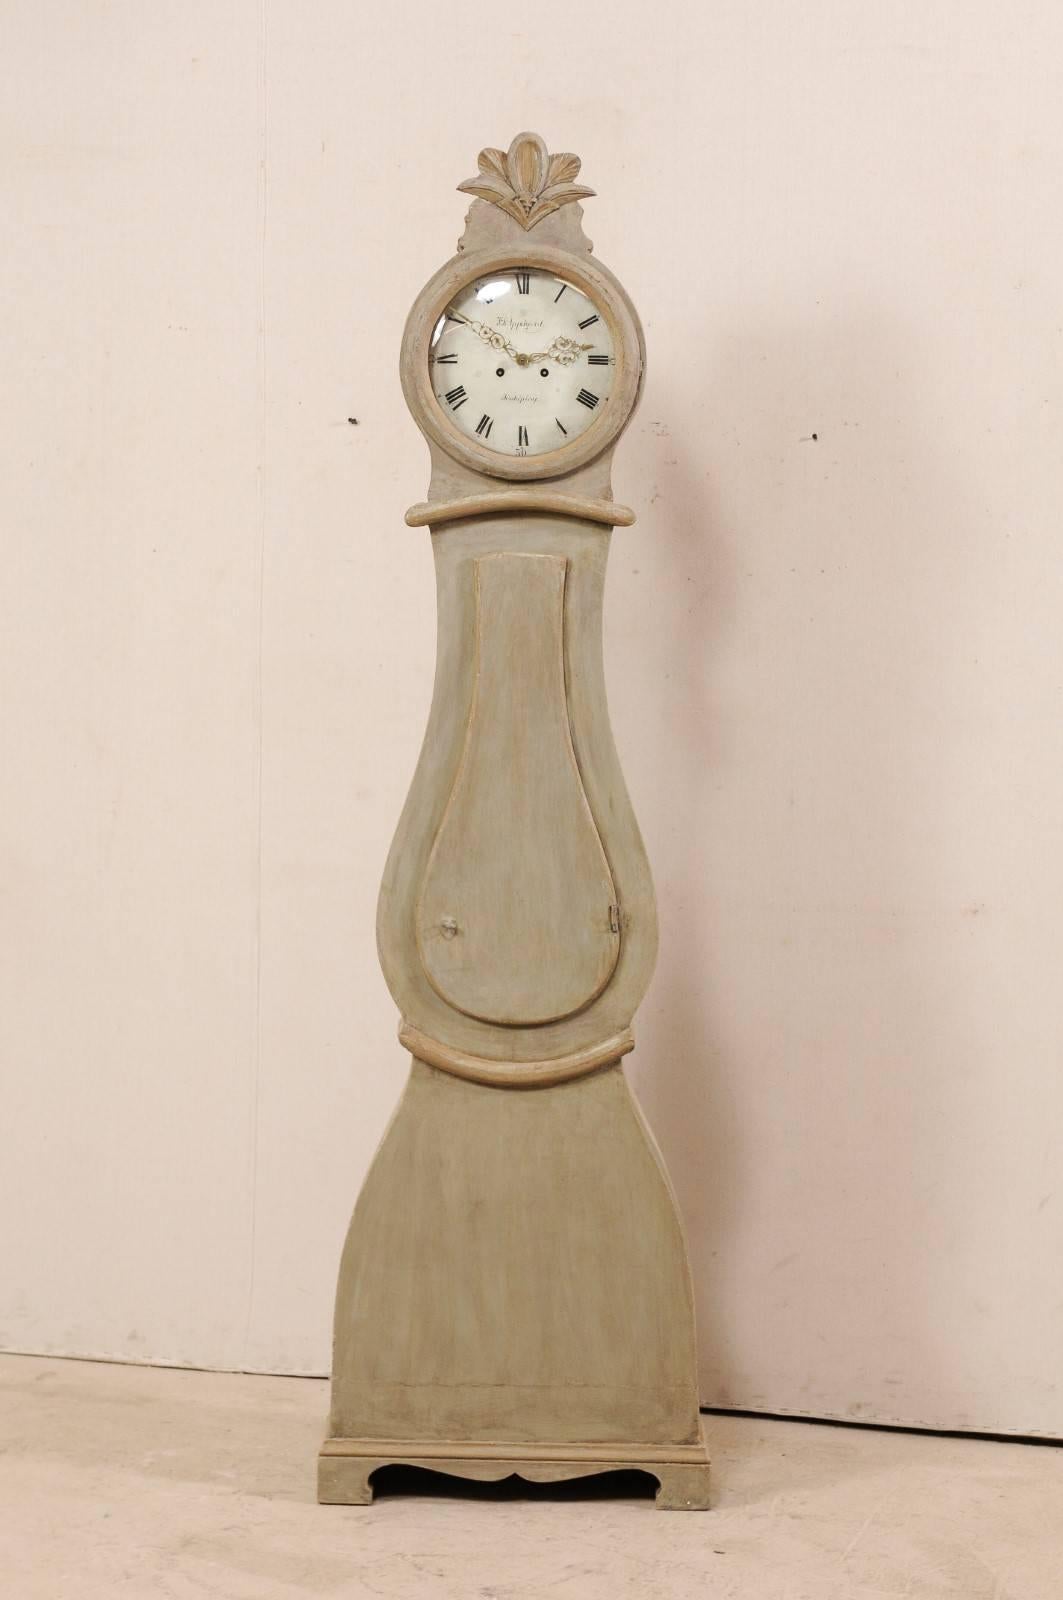 A Swedish 19th century painted wood floor clock. This antique floor clock from Sweden features a sweetly carved and raised fanned-leaf crest, atop the circular face with roman numerals and exquisitely adorn brass hands. The body has a teardrop